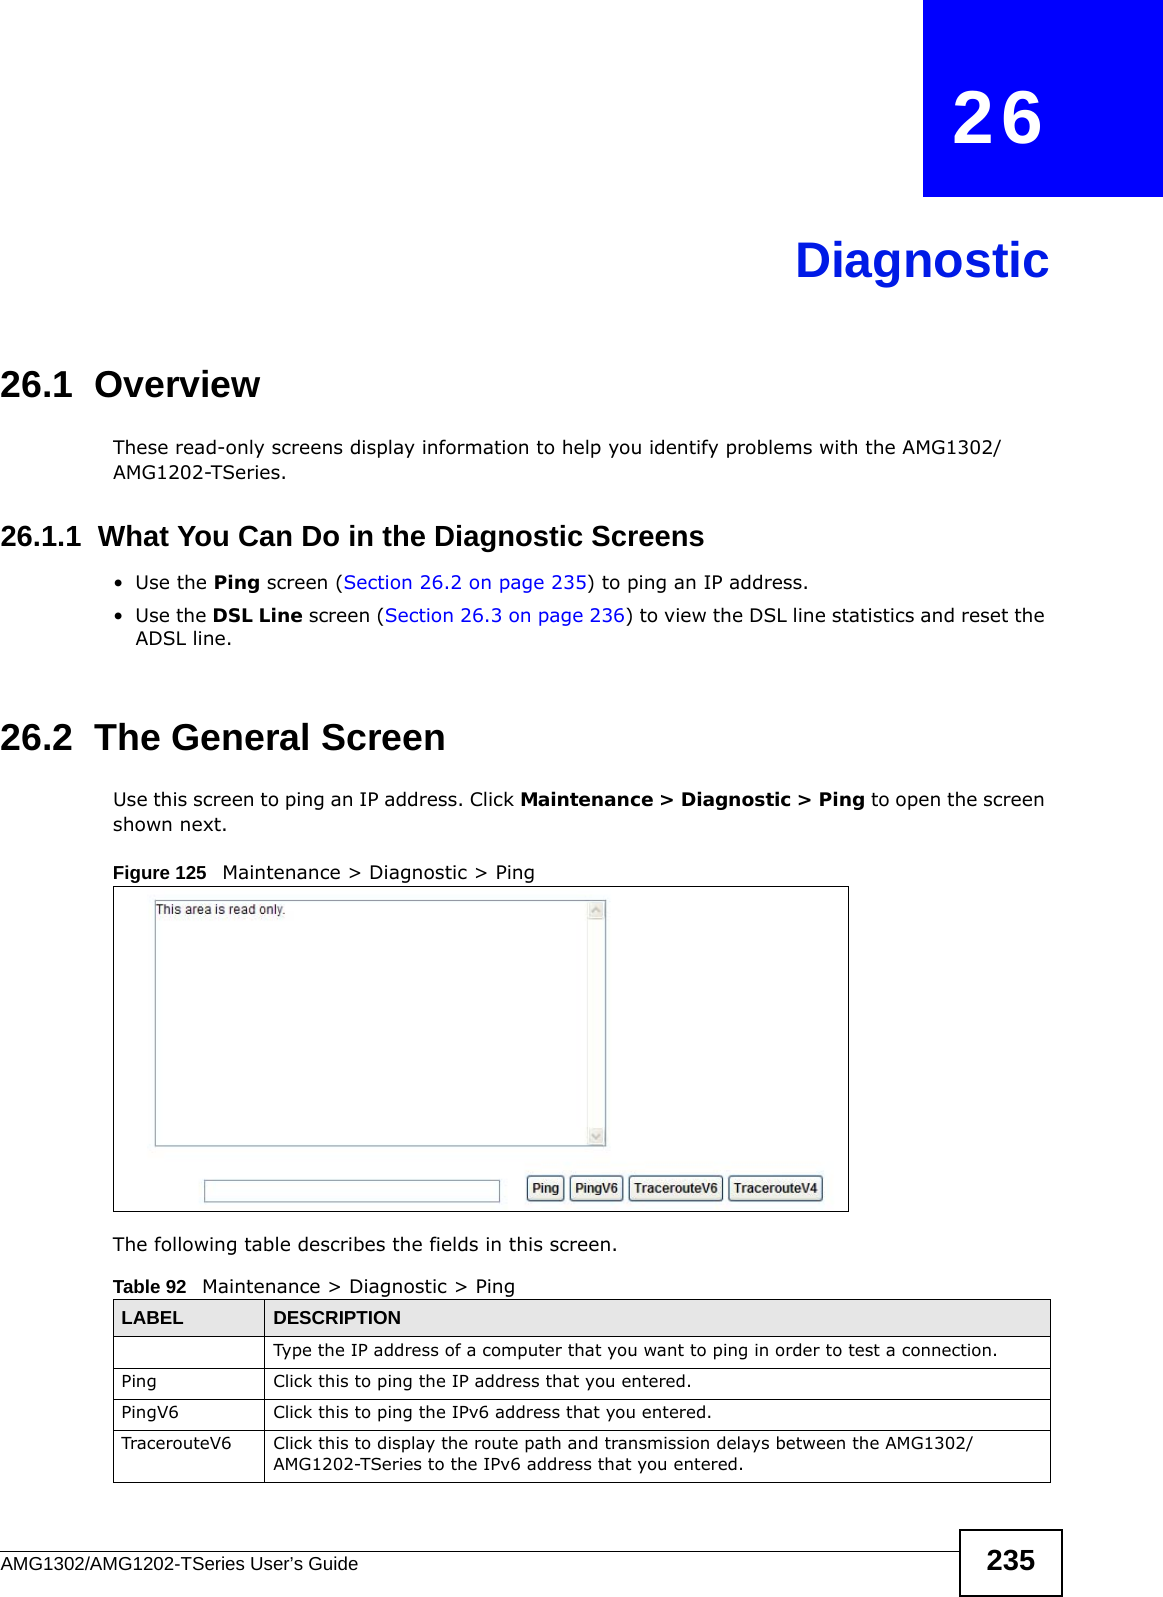 AMG1302/AMG1202-TSeries User’s Guide 235CHAPTER   26Diagnostic26.1  OverviewThese read-only screens display information to help you identify problems with the AMG1302/AMG1202-TSeries.26.1.1  What You Can Do in the Diagnostic Screens•Use the Ping screen (Section 26.2 on page 235) to ping an IP address.•Use the DSL Line screen (Section 26.3 on page 236) to view the DSL line statistics and reset the ADSL line.26.2  The General Screen Use this screen to ping an IP address. Click Maintenance &gt; Diagnostic &gt; Ping to open the screen shown next.Figure 125   Maintenance &gt; Diagnostic &gt; PingThe following table describes the fields in this screen. Table 92   Maintenance &gt; Diagnostic &gt; PingLABEL DESCRIPTIONType the IP address of a computer that you want to ping in order to test a connection.Ping Click this to ping the IP address that you entered.PingV6 Click this to ping the IPv6 address that you entered.TracerouteV6 Click this to display the route path and transmission delays between the AMG1302/AMG1202-TSeries to the IPv6 address that you entered.